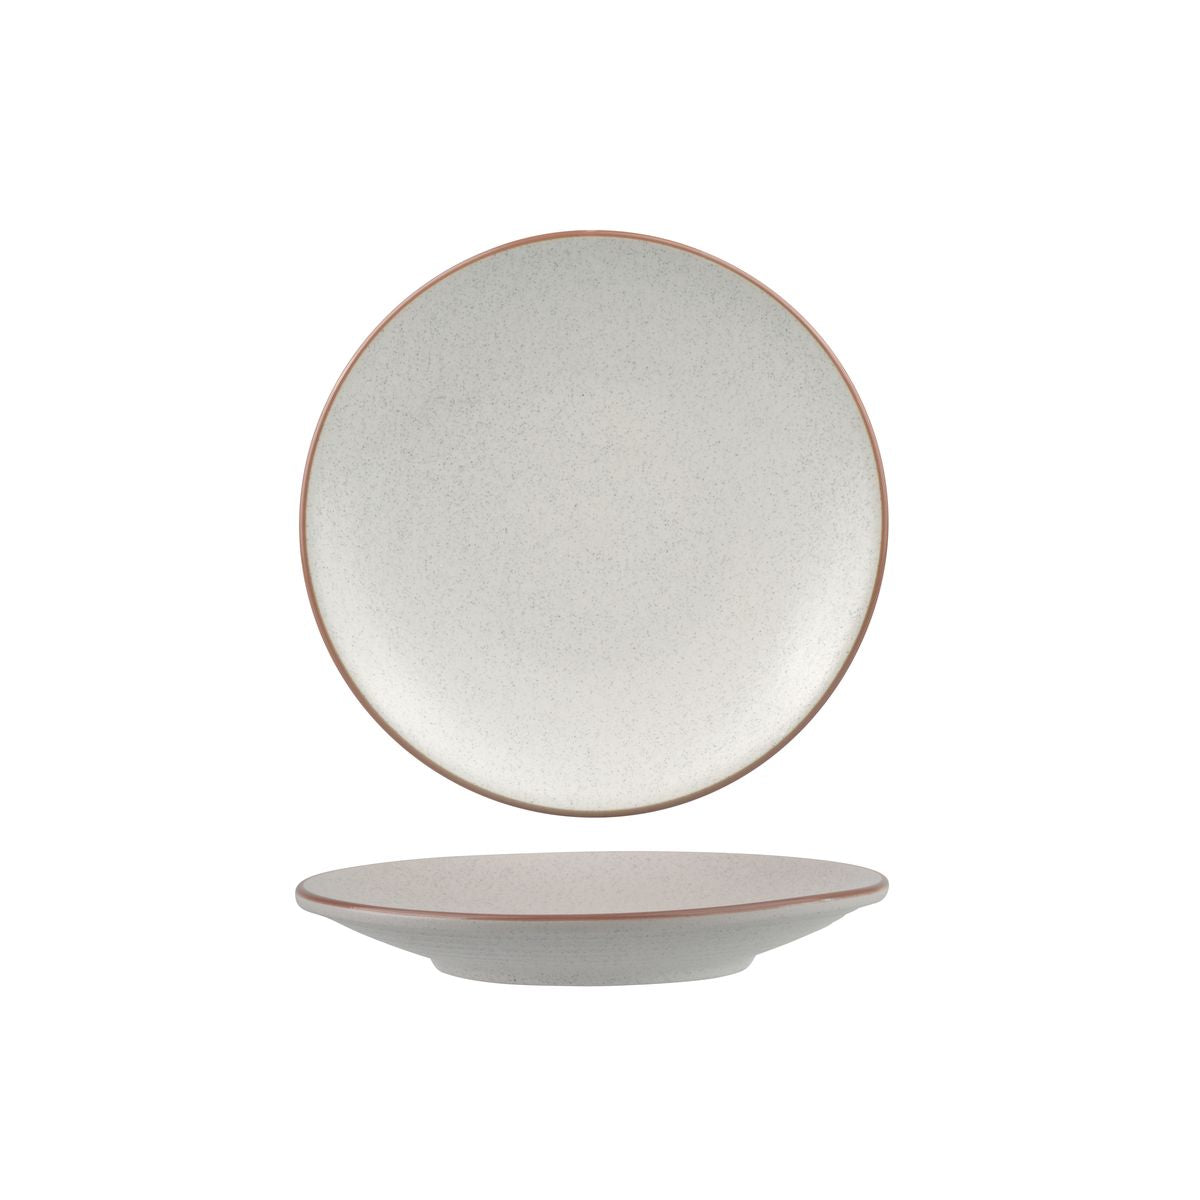 Tapas Plate - 180mm, Zuma Mineral from Zuma. Matt Finish, made out of Ceramic and sold in boxes of 6. Hospitality quality at wholesale price with The Flying Fork! 